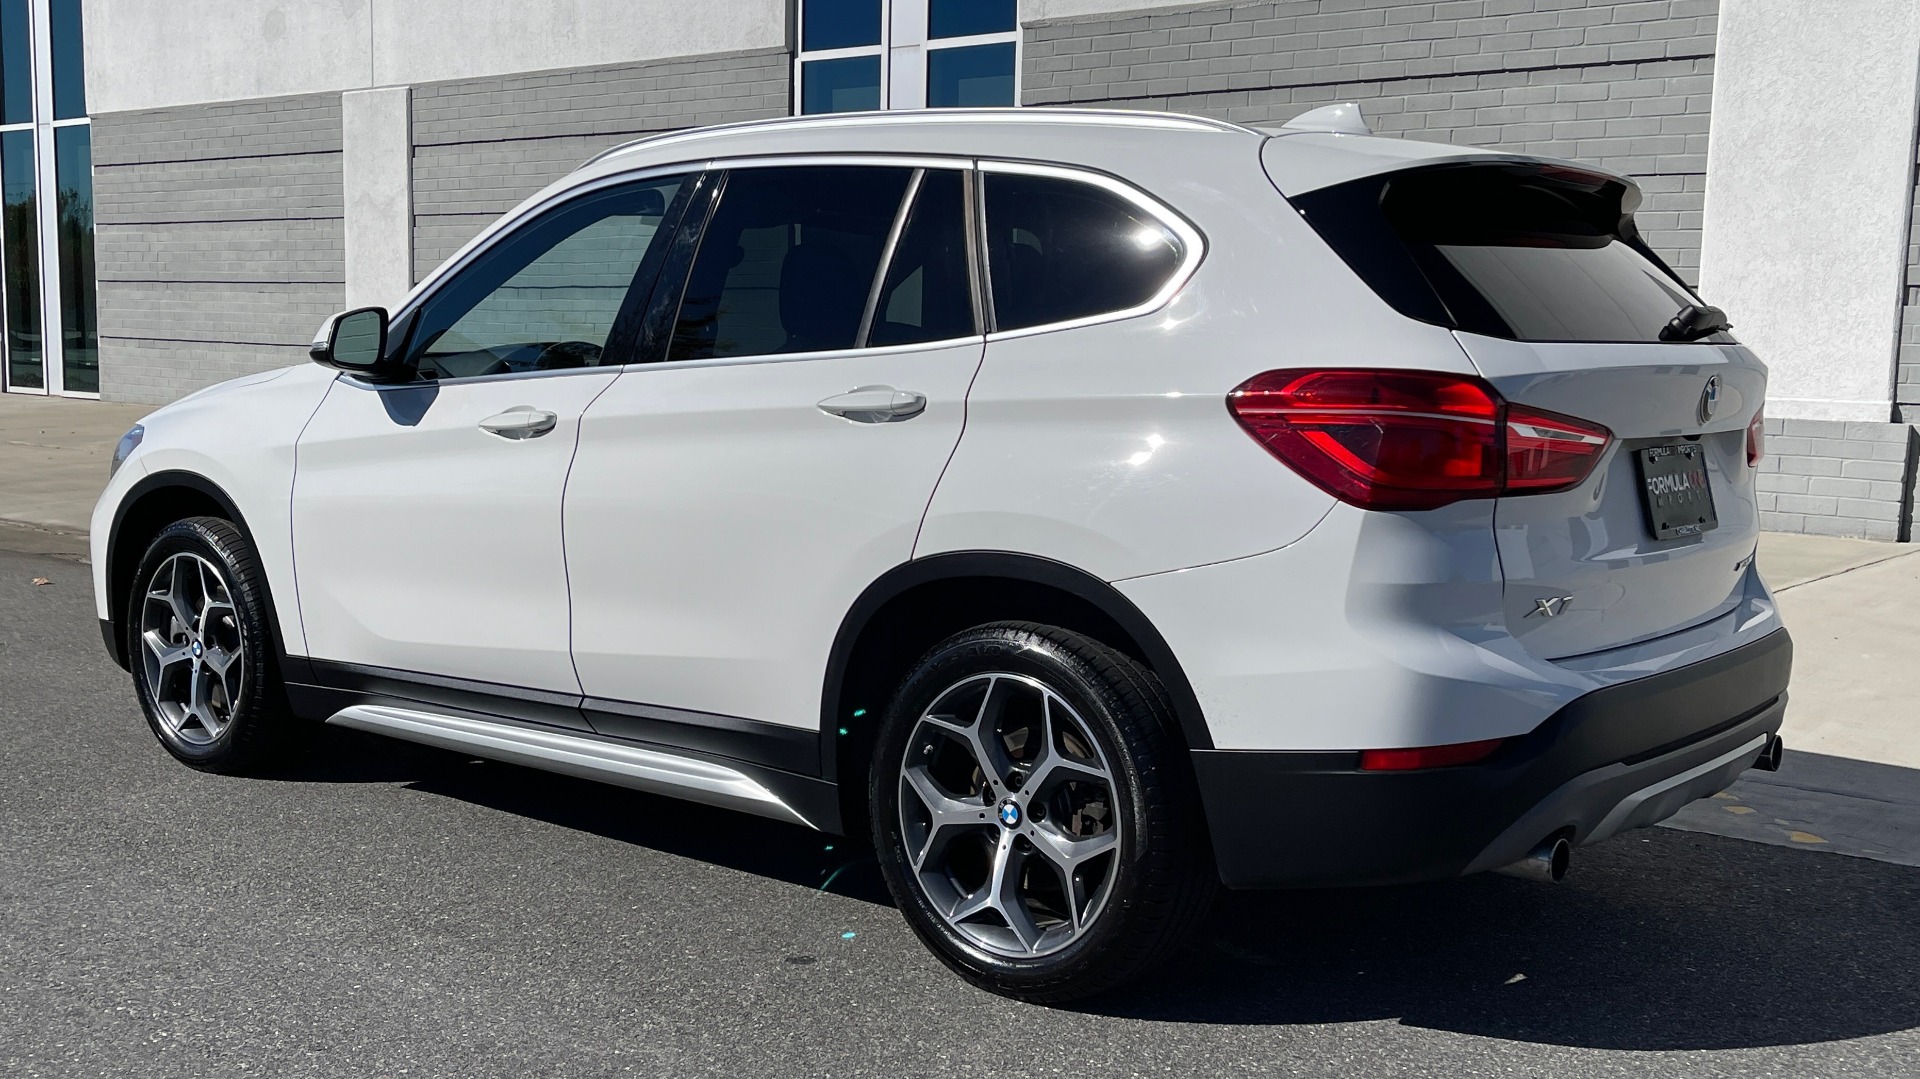 Used 2018 BMW X1 XDRIVE28I 2.0L / CONVENIENCE PKG / PANO-ROOF / REARVIEW for sale Sold at Formula Imports in Charlotte NC 28227 4